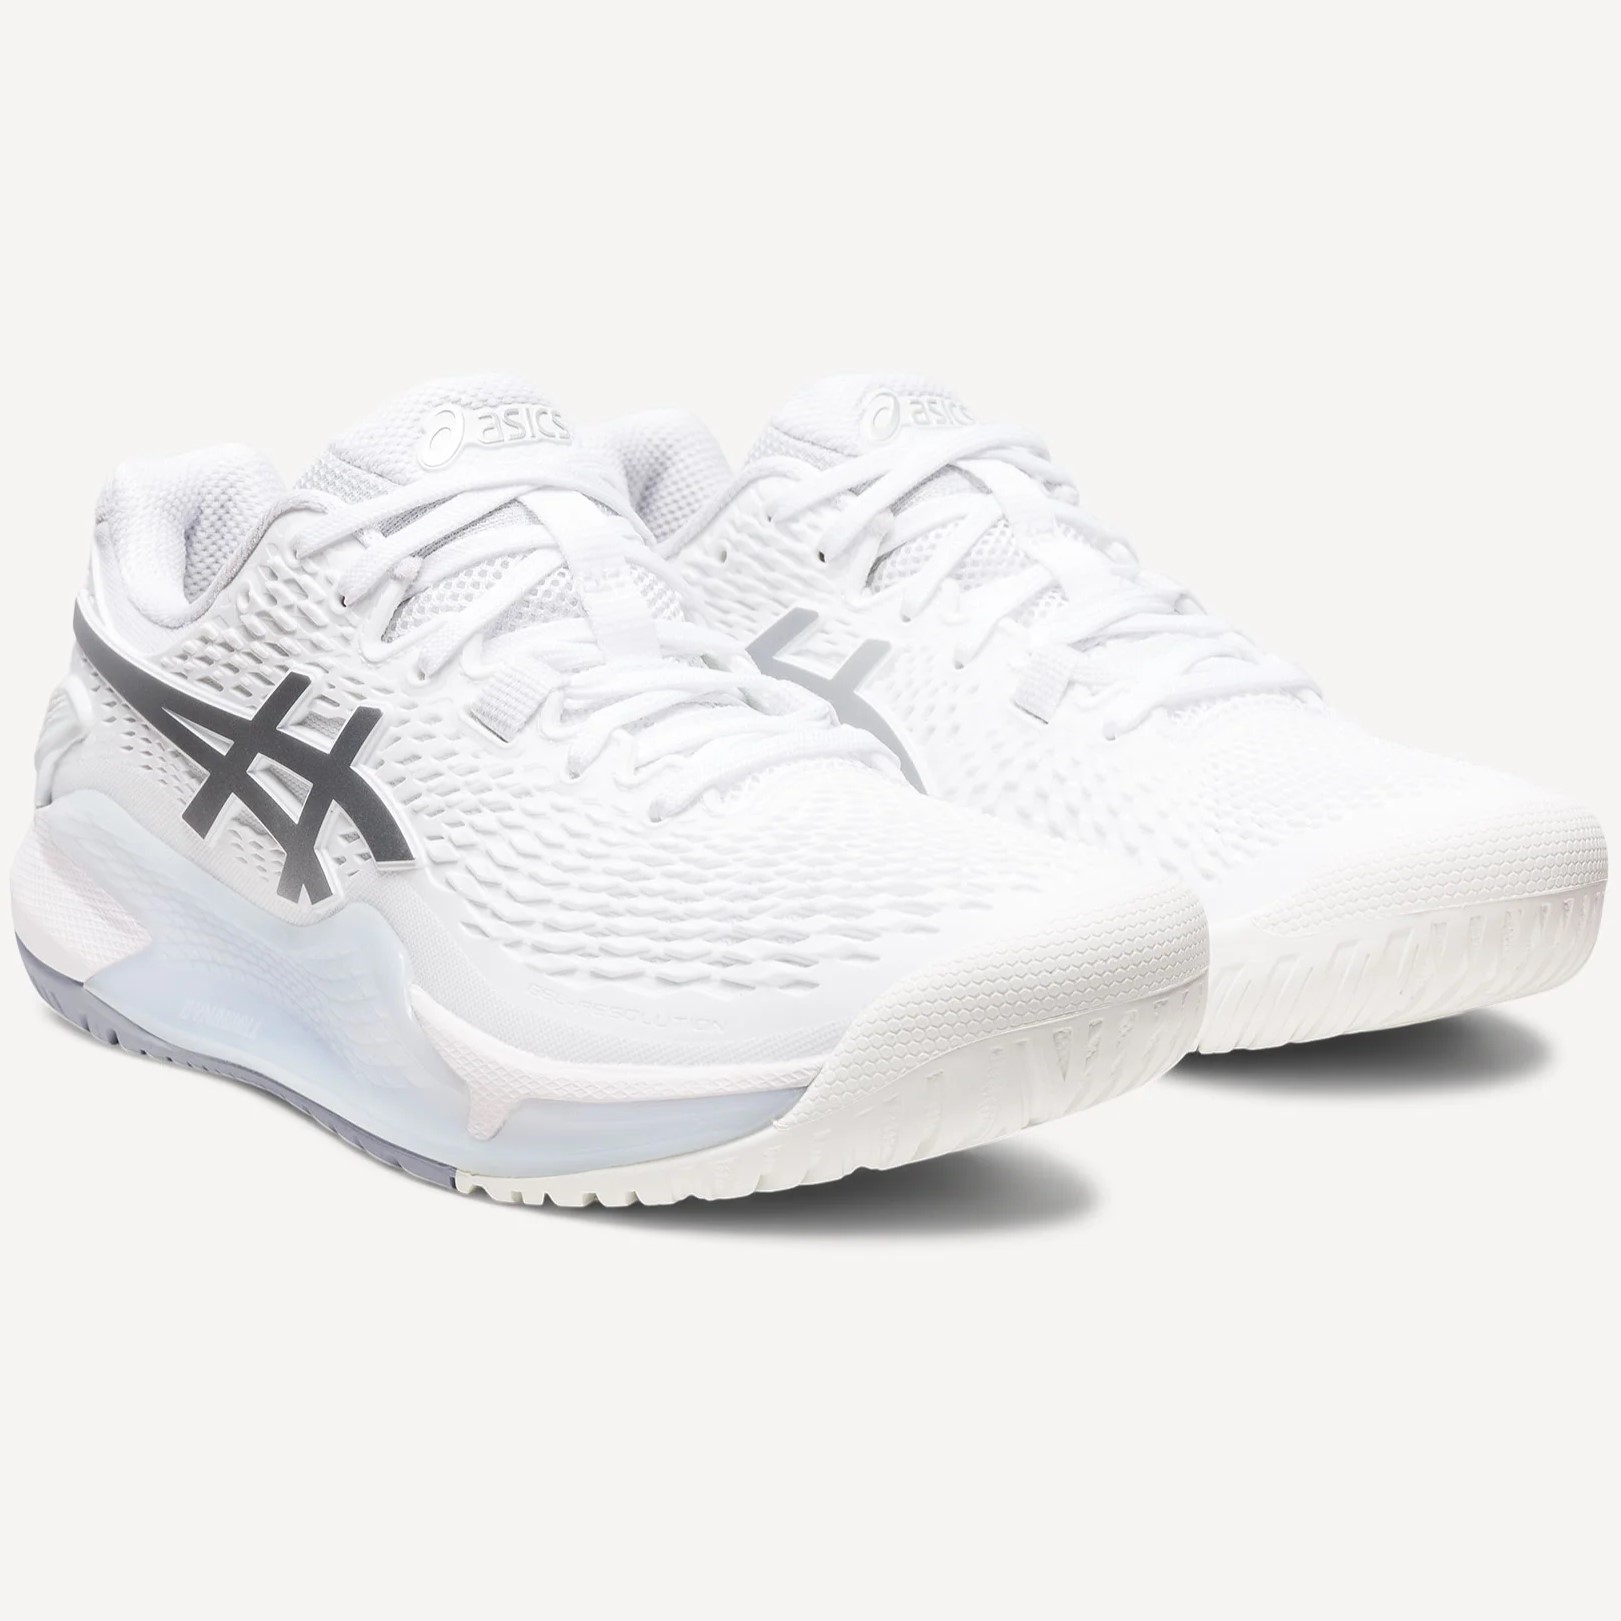 GIÀY ASICS NỮ GEL-RESOLUTION 9 WOMENS TENNIS SHOES WHITE PURE SILVER 1042A208-100 11